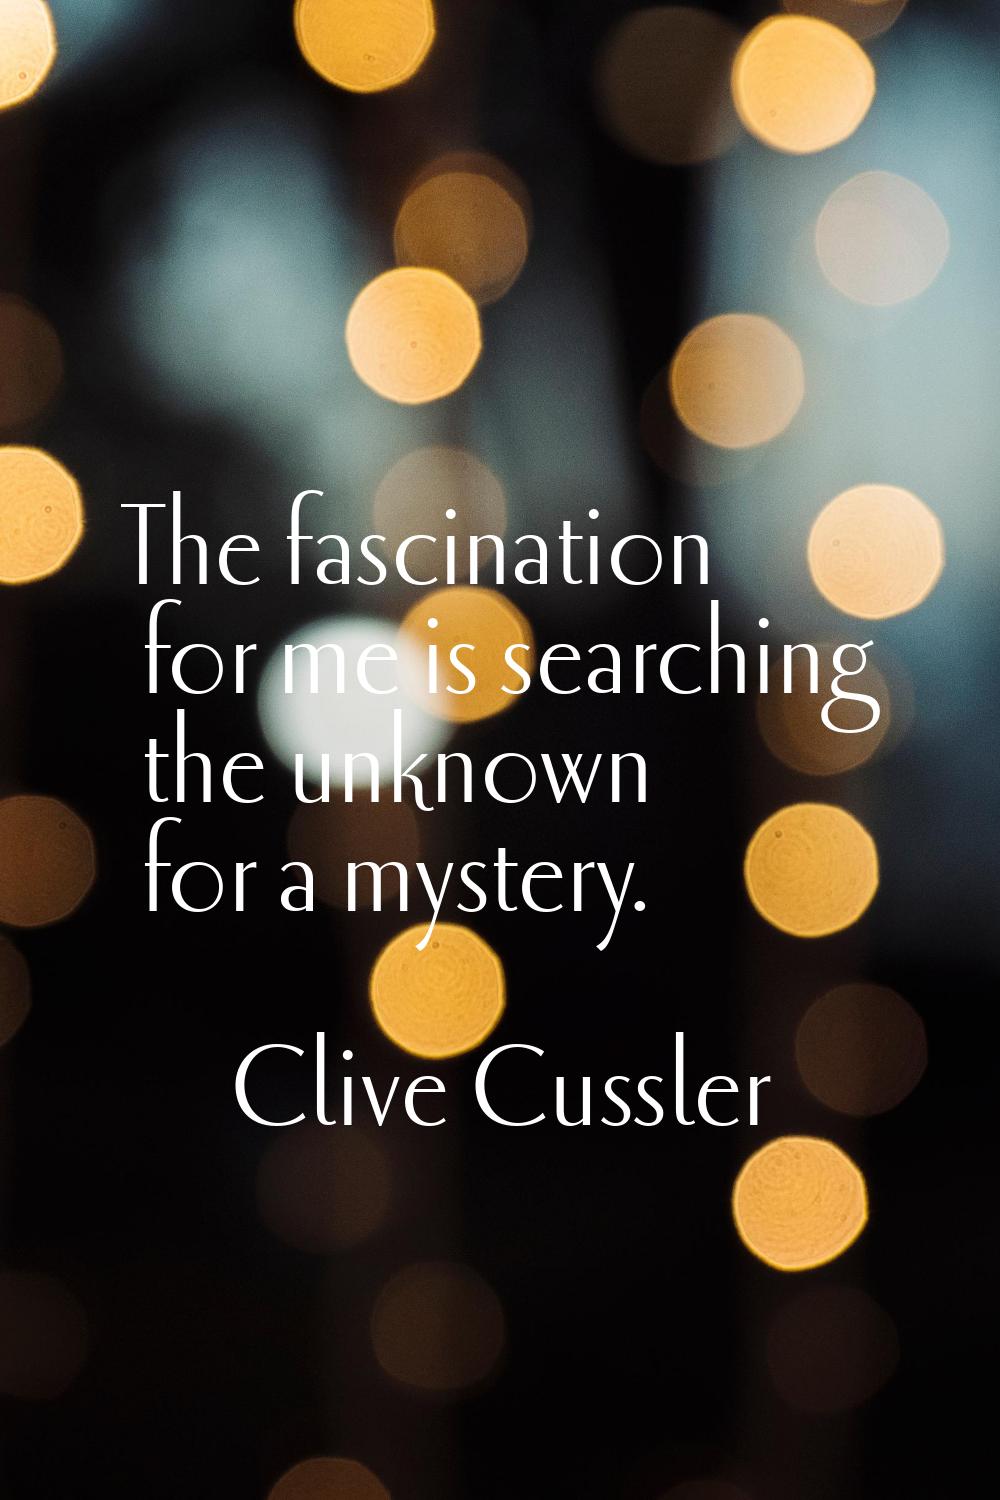 The fascination for me is searching the unknown for a mystery.